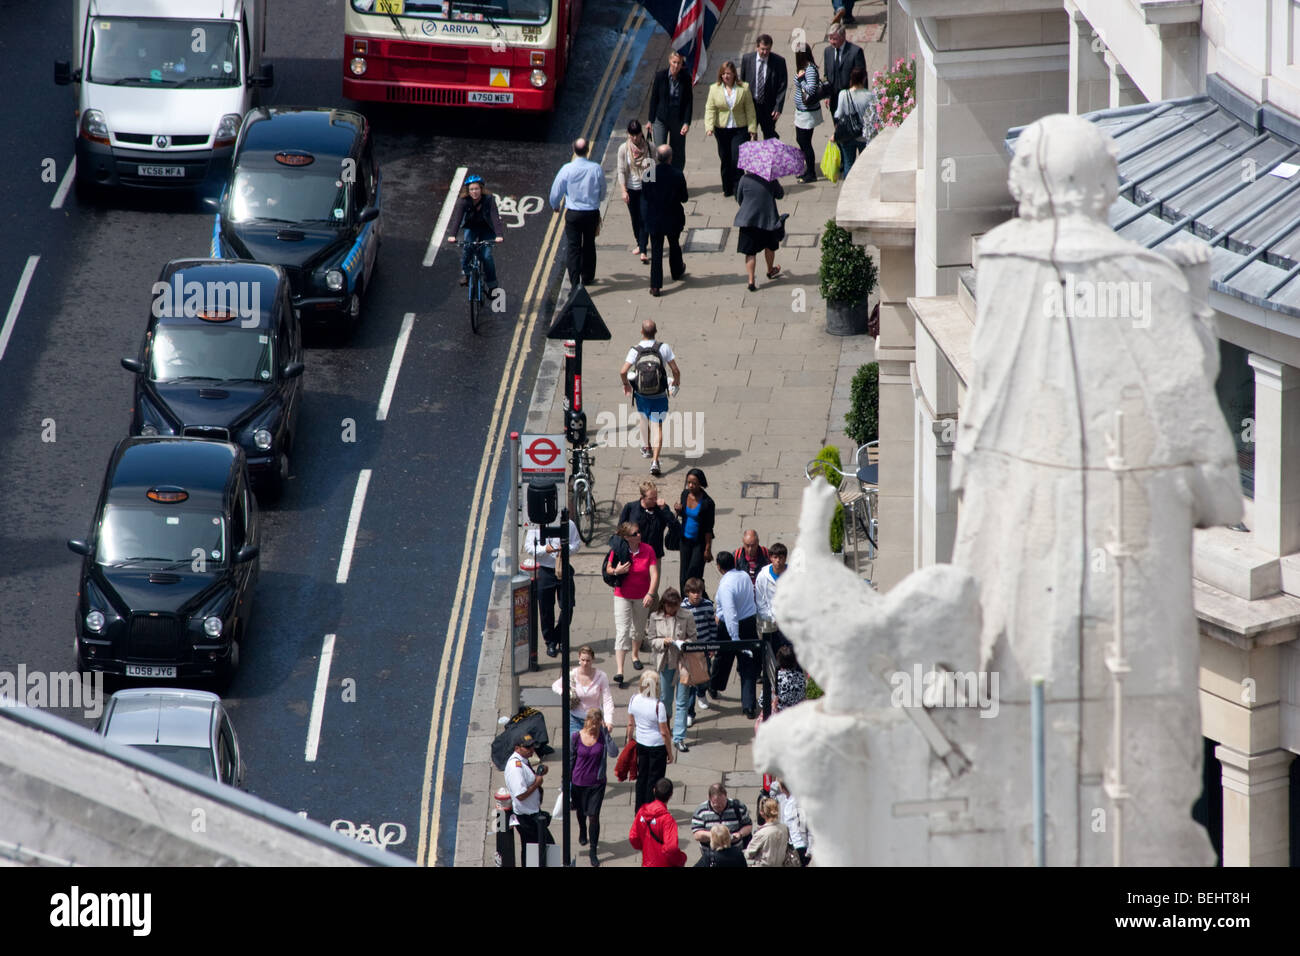 View of taxis, people and buses on Ludgate Hill from St Pauls Cathedral, with statue to the right. Stock Photo